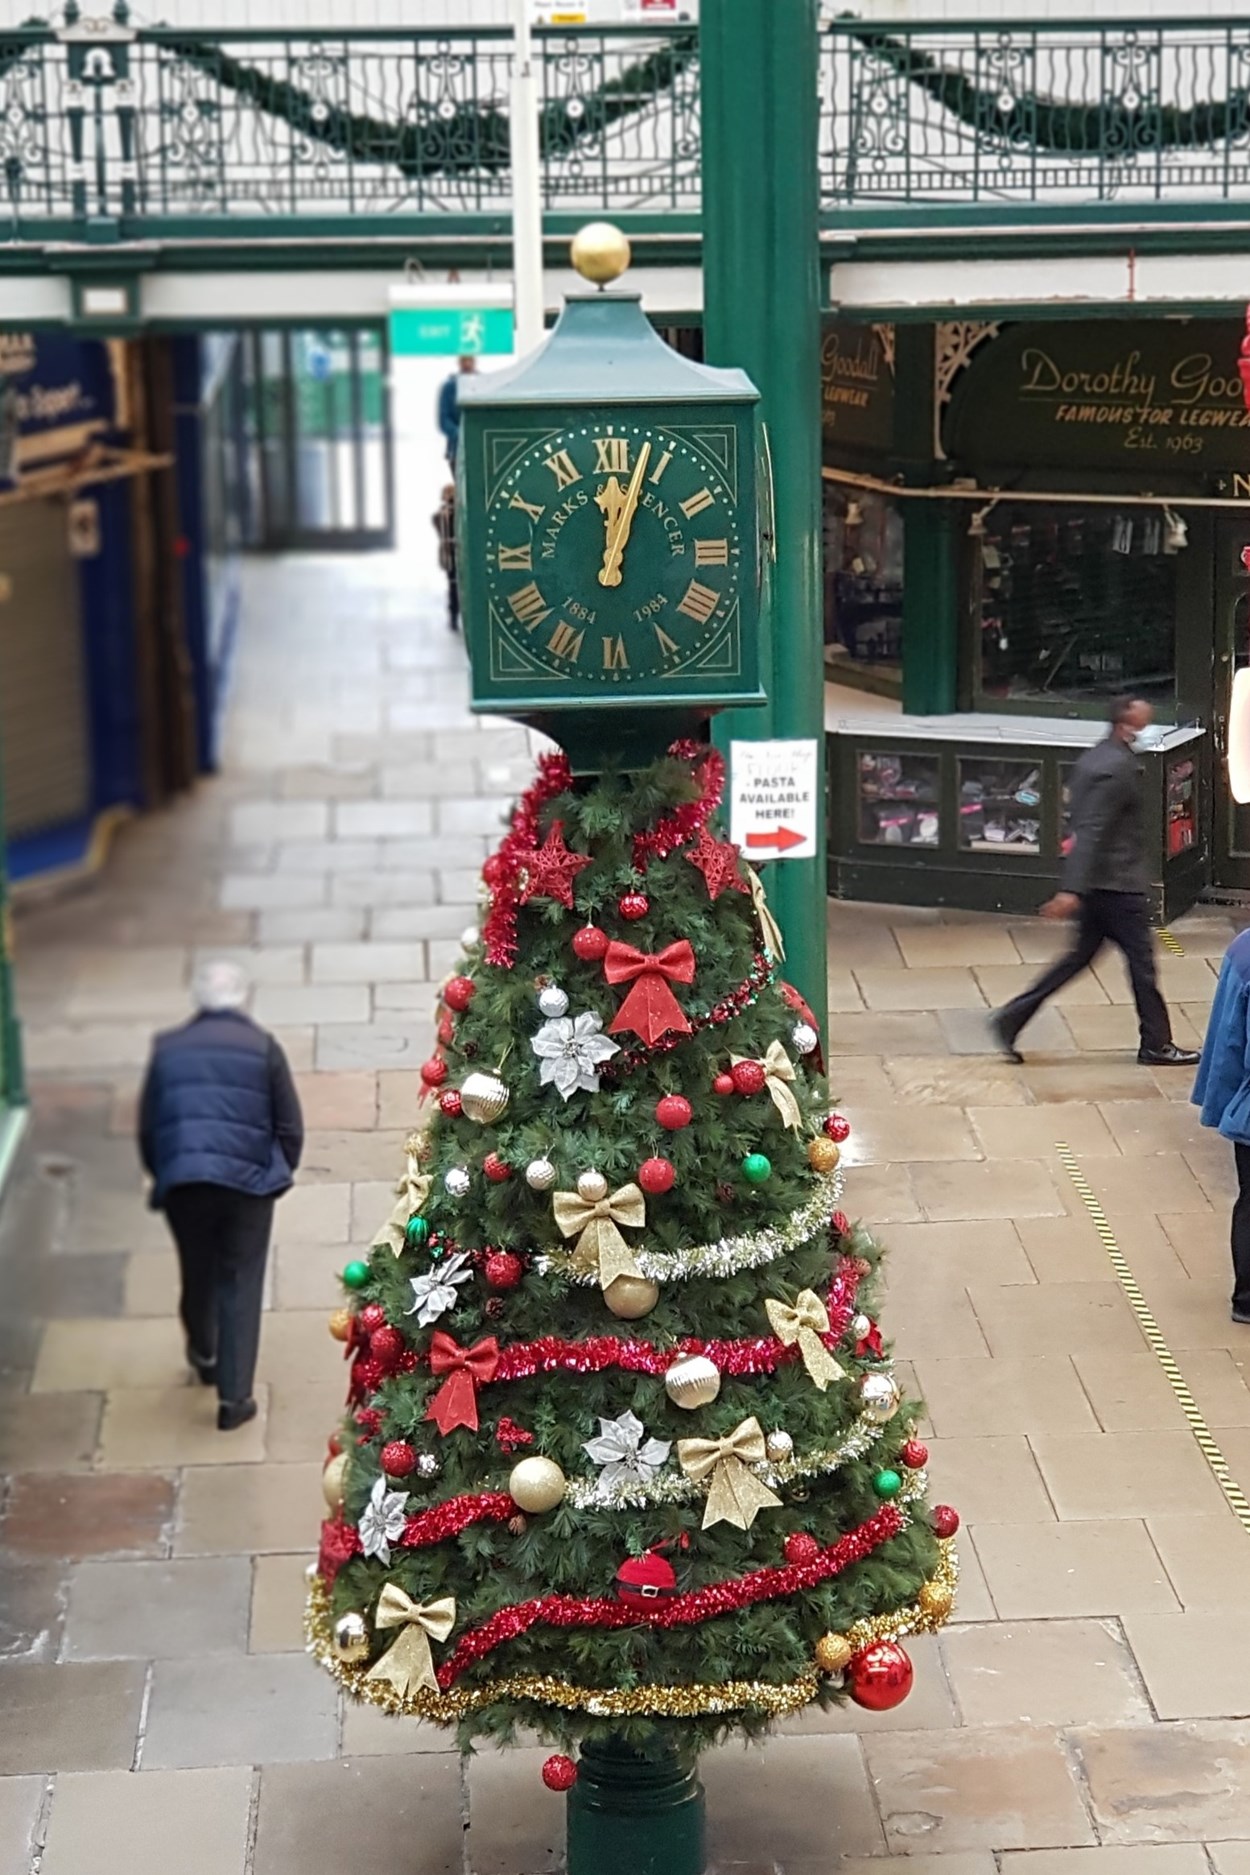 M&S christmas clock: Pick up everything you need for Christmas this year at Leeds Kirkgate Market.